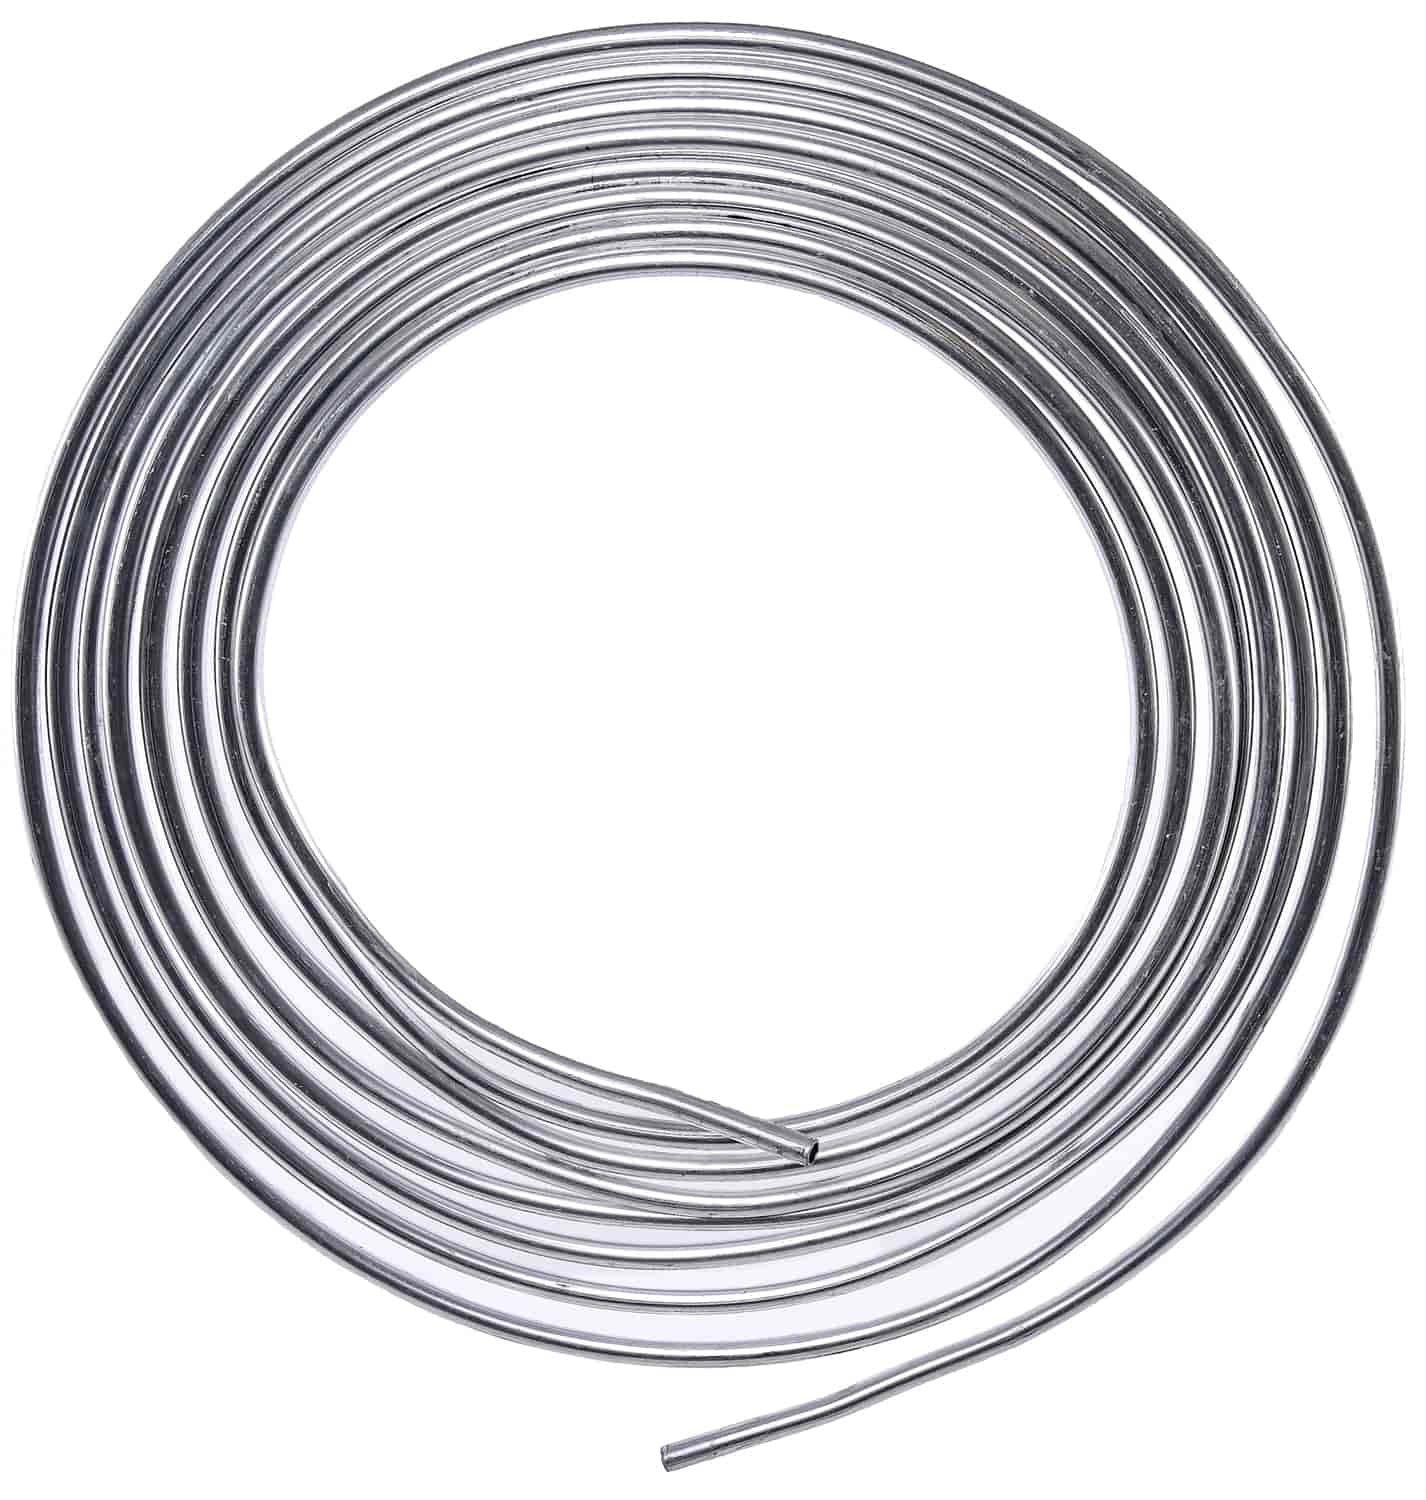 Aluminum Fuel Line [1/4 in. OD x 0.035 in. Wall]